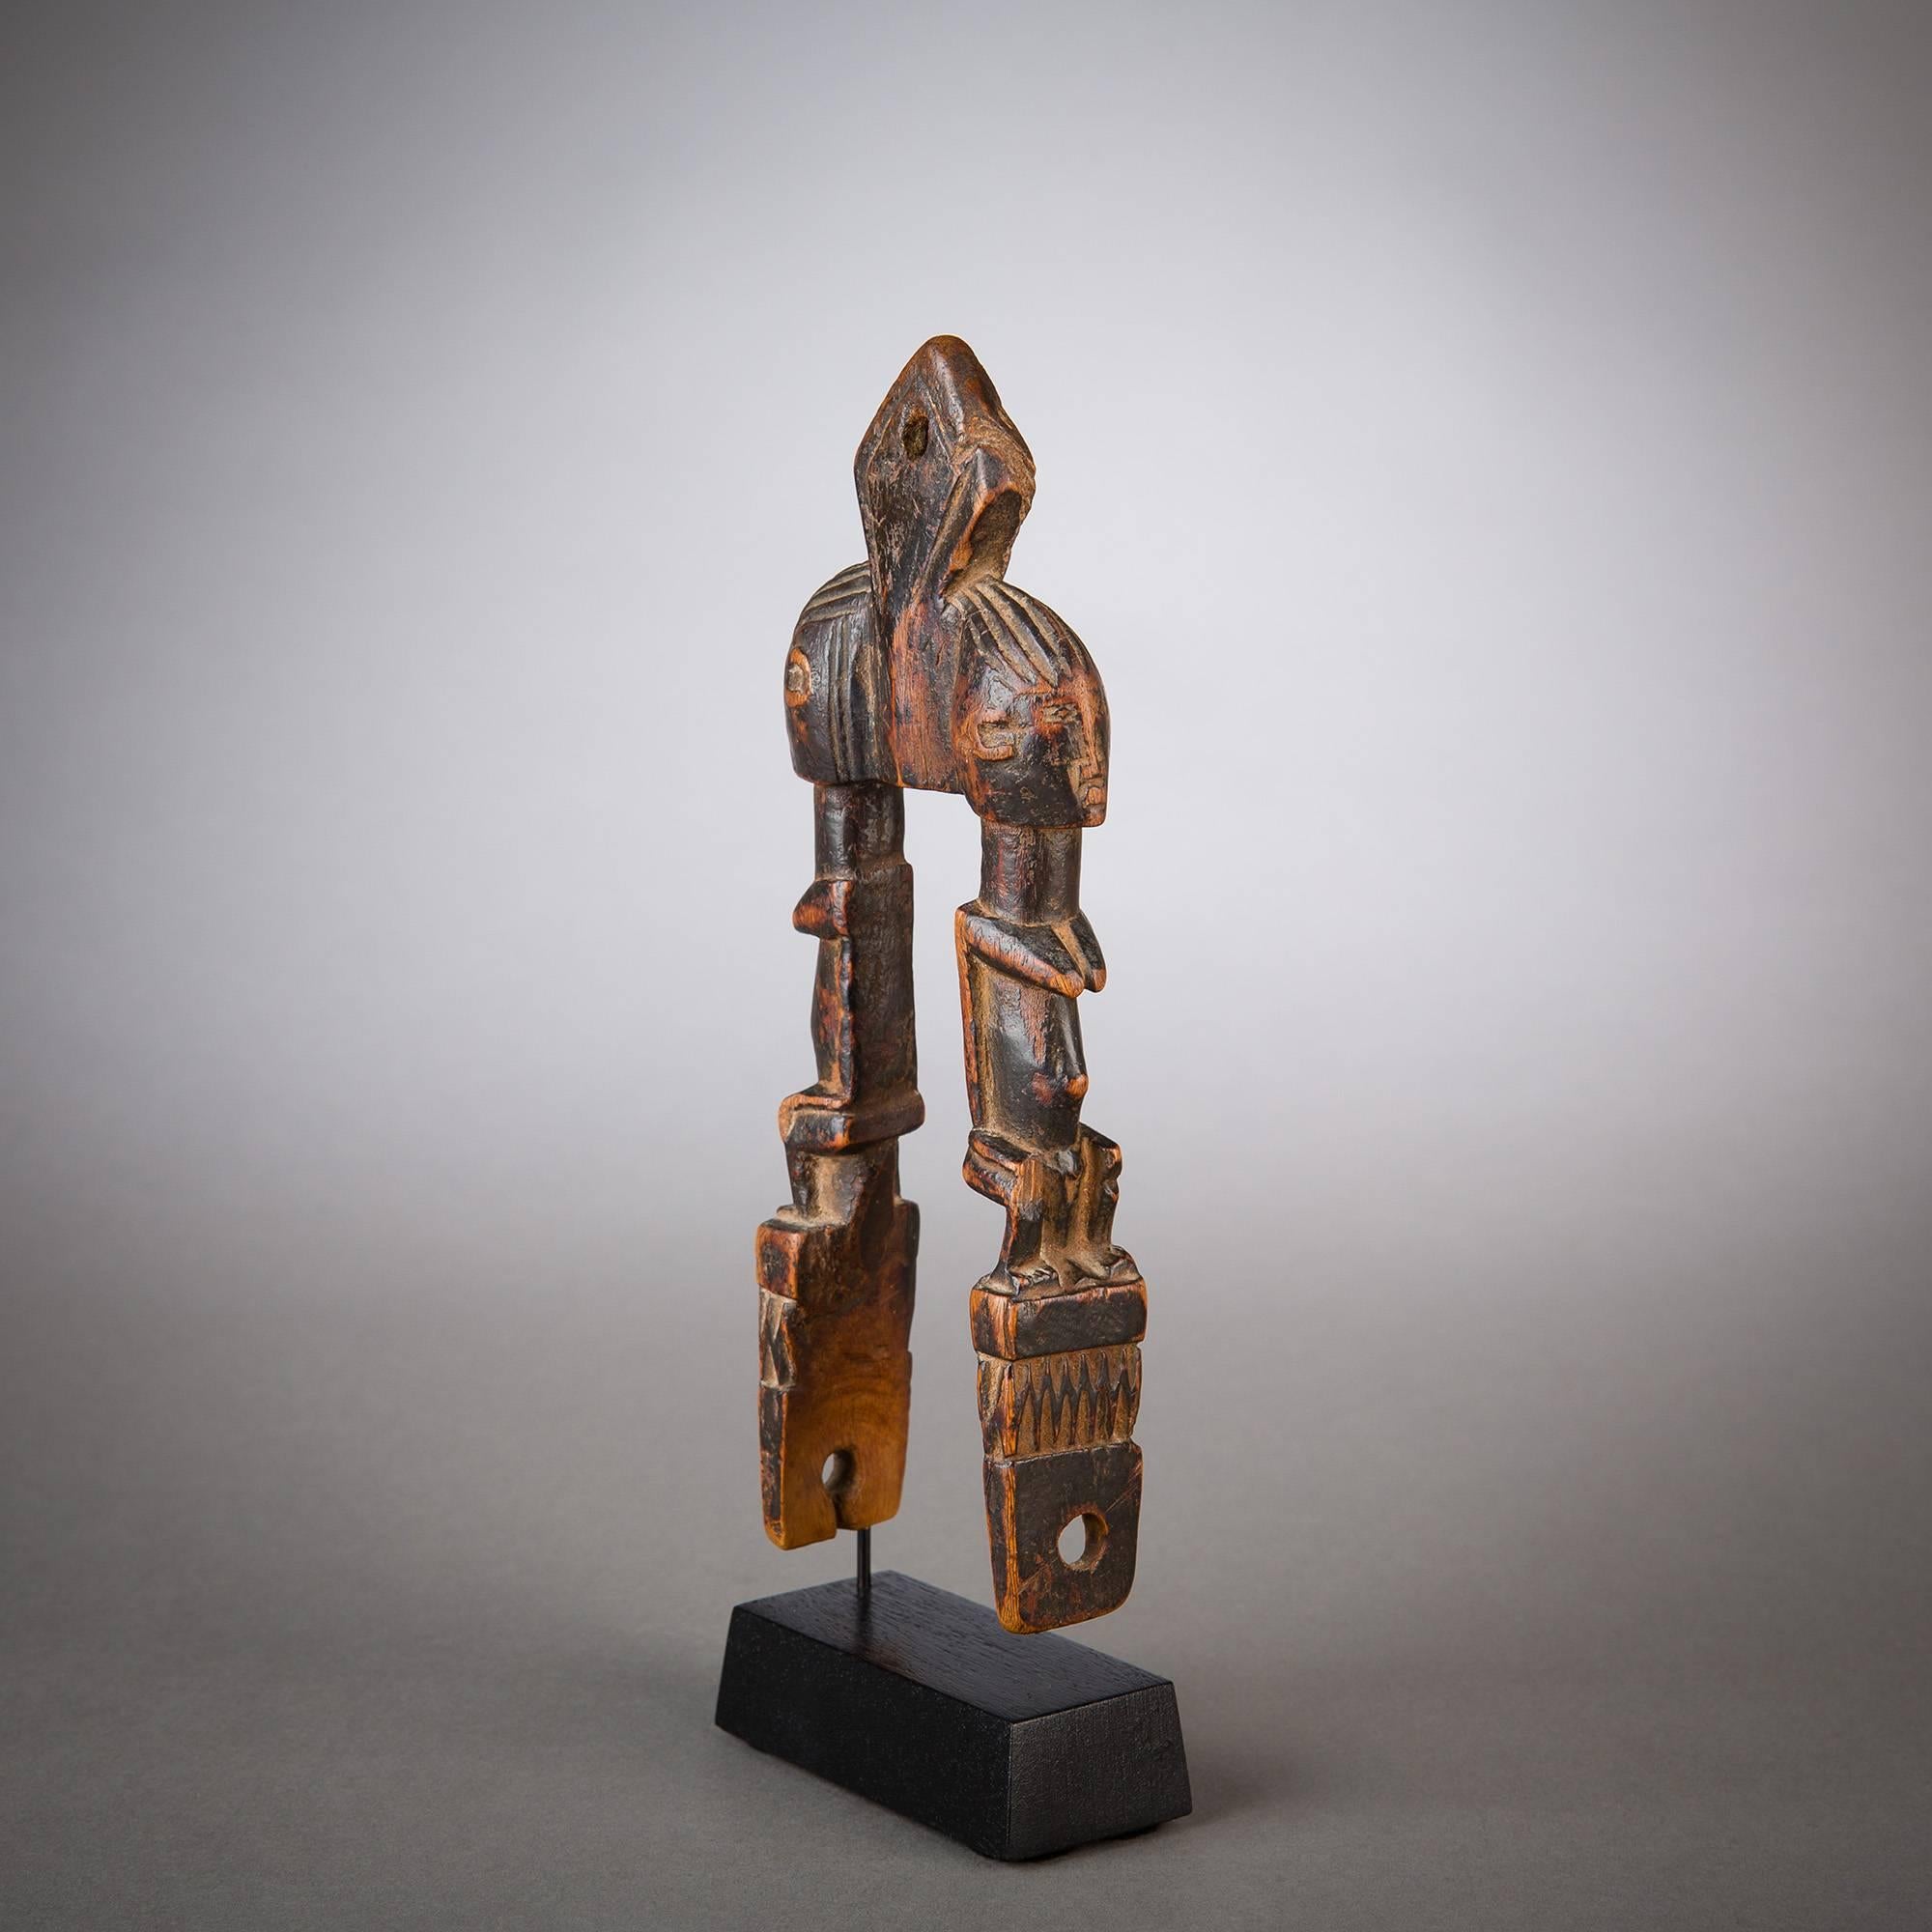 Delicate symmetry defines this old, rare heddle pulley, which features twin figures posed back to back across an open space. The slim, caliper like silhouette of the pulley has been shaped with delicacy, and the dark patina shows lovely reddish